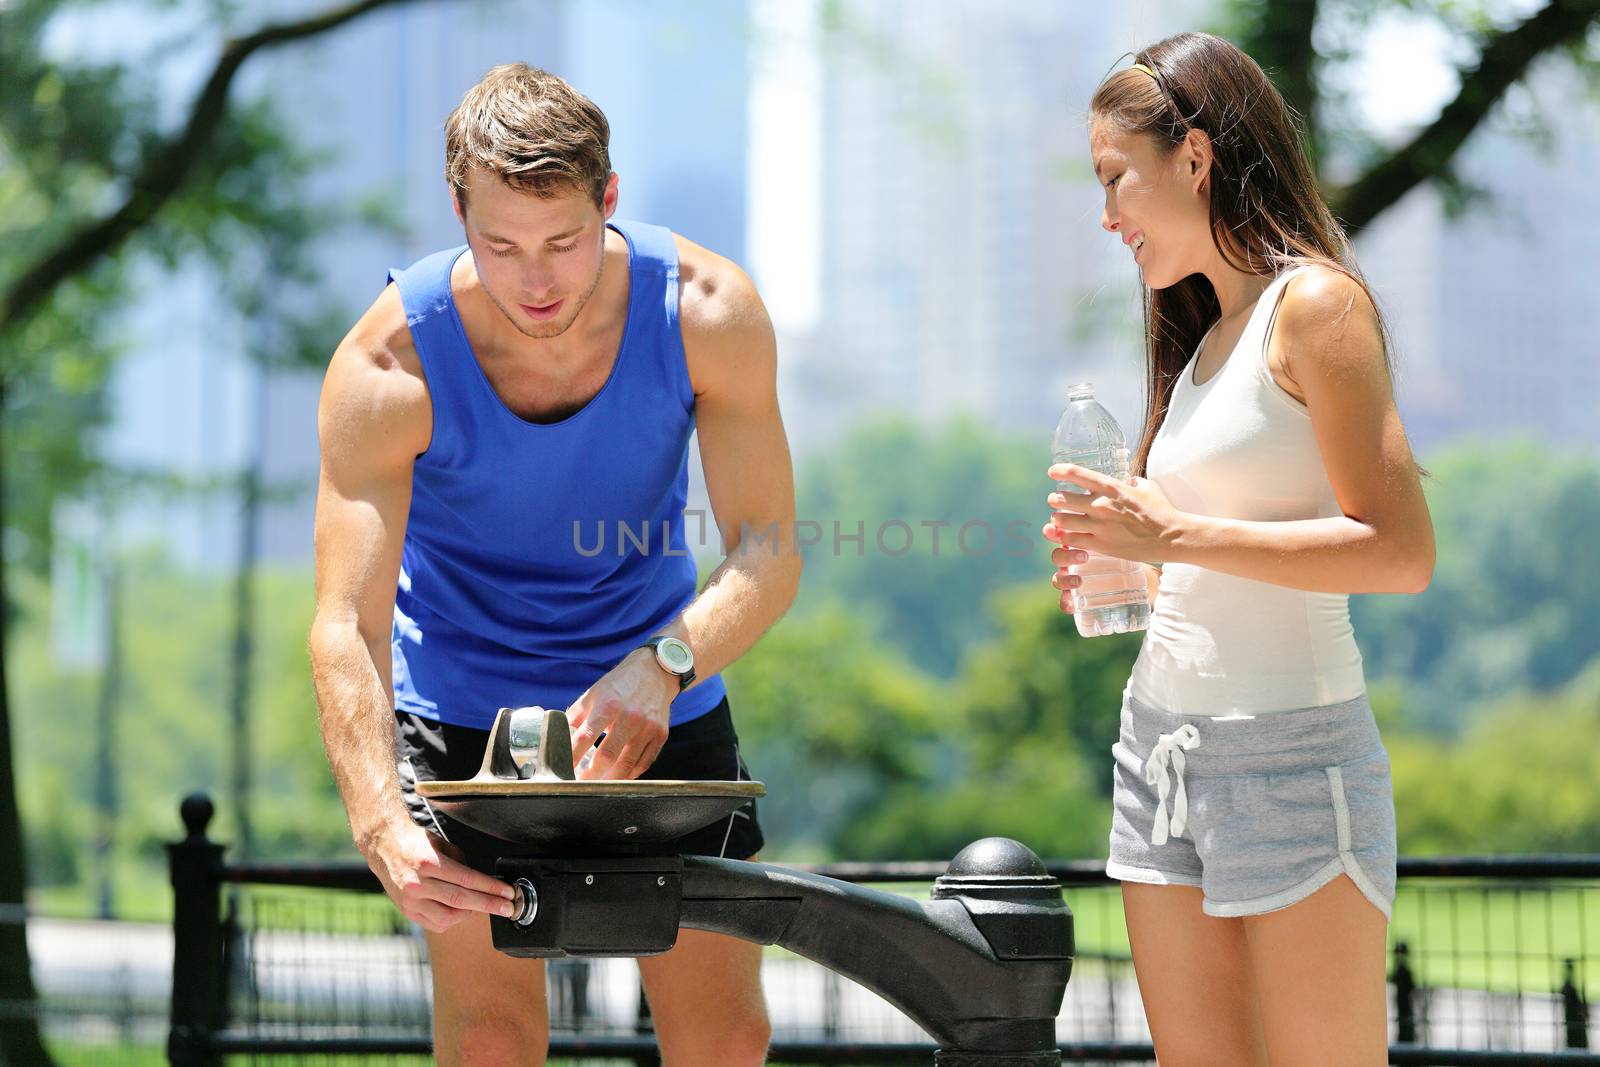 Public park water fountain couple runners drinking. Two young active male and female adults thirsty after run using a drinking fountain in Central Park, New York City, Manhattan in summer, USA.